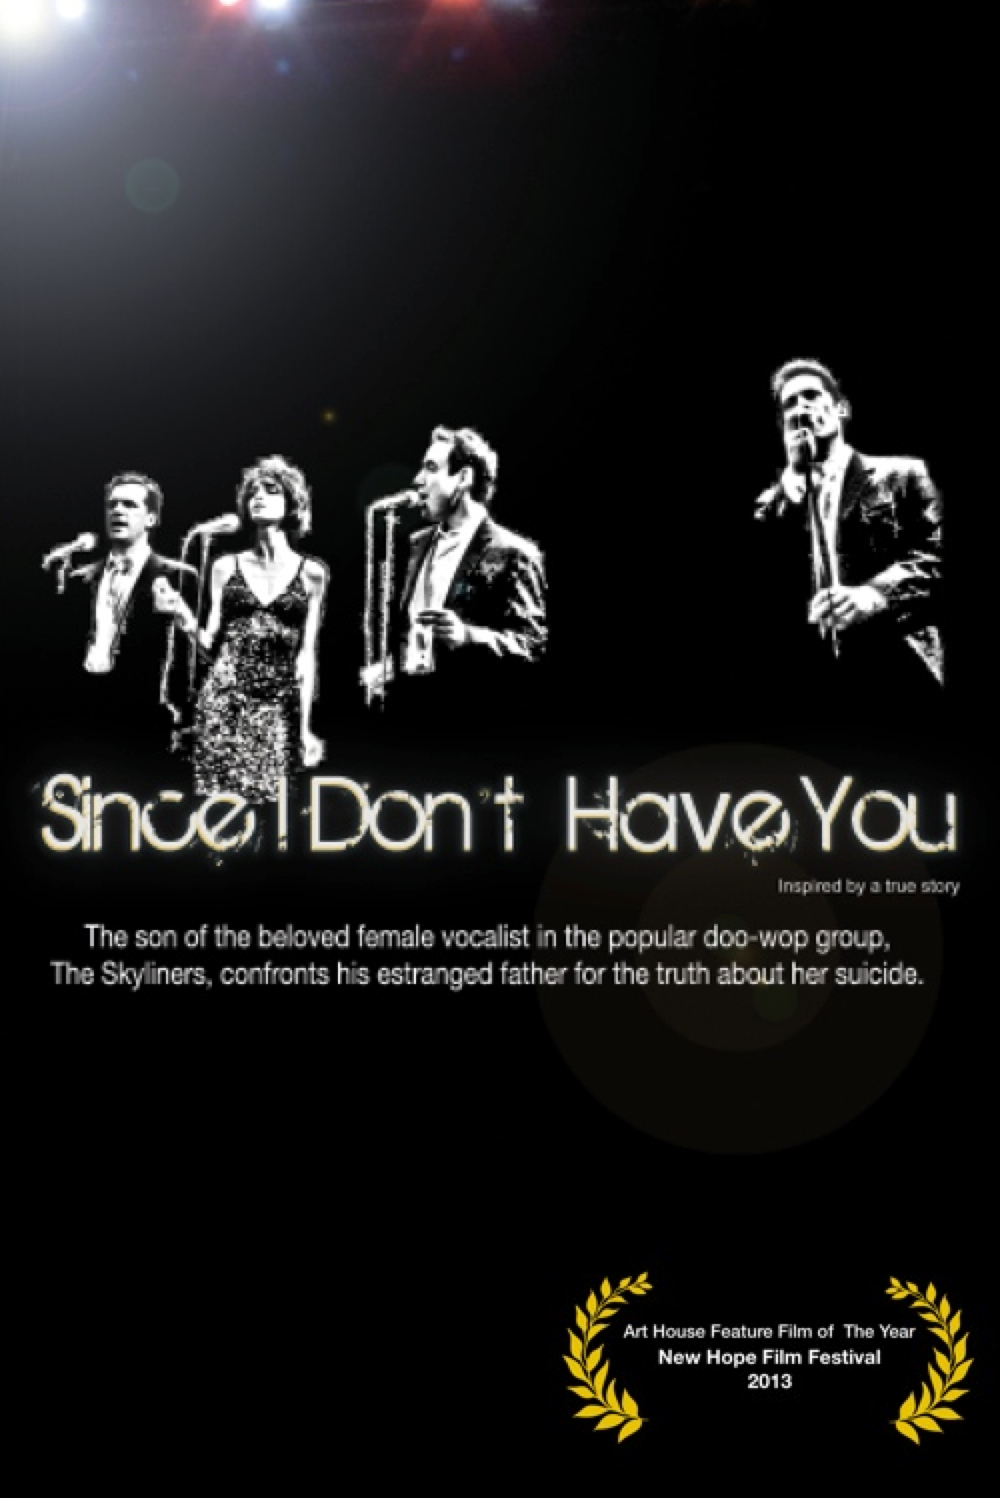 Since I Don't Have You - movie poster